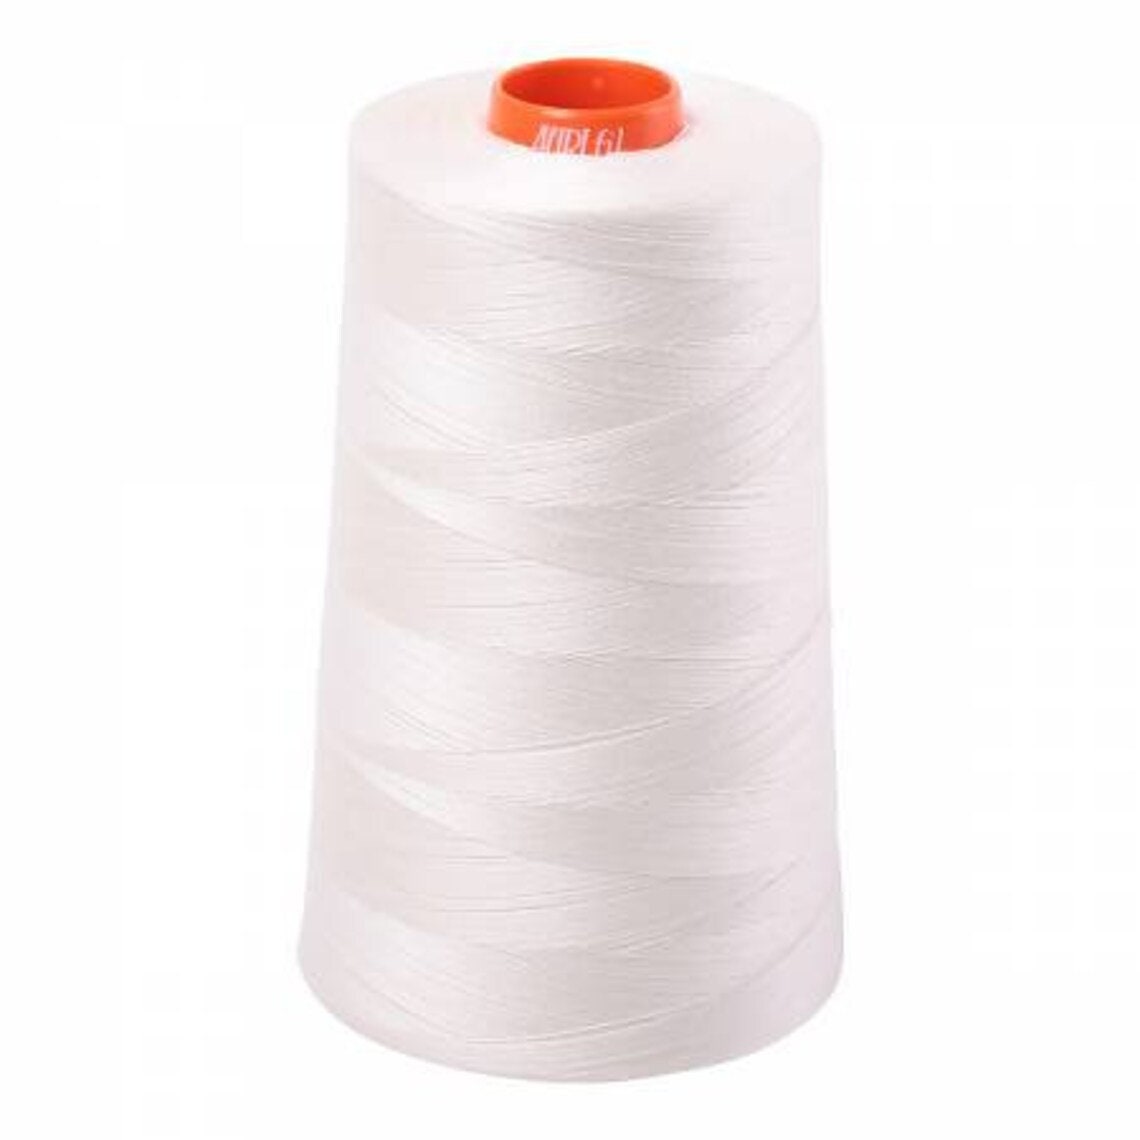 Connecting Threads Essential Cotton Thread 5000 Yard Cone Set of 2 (White)